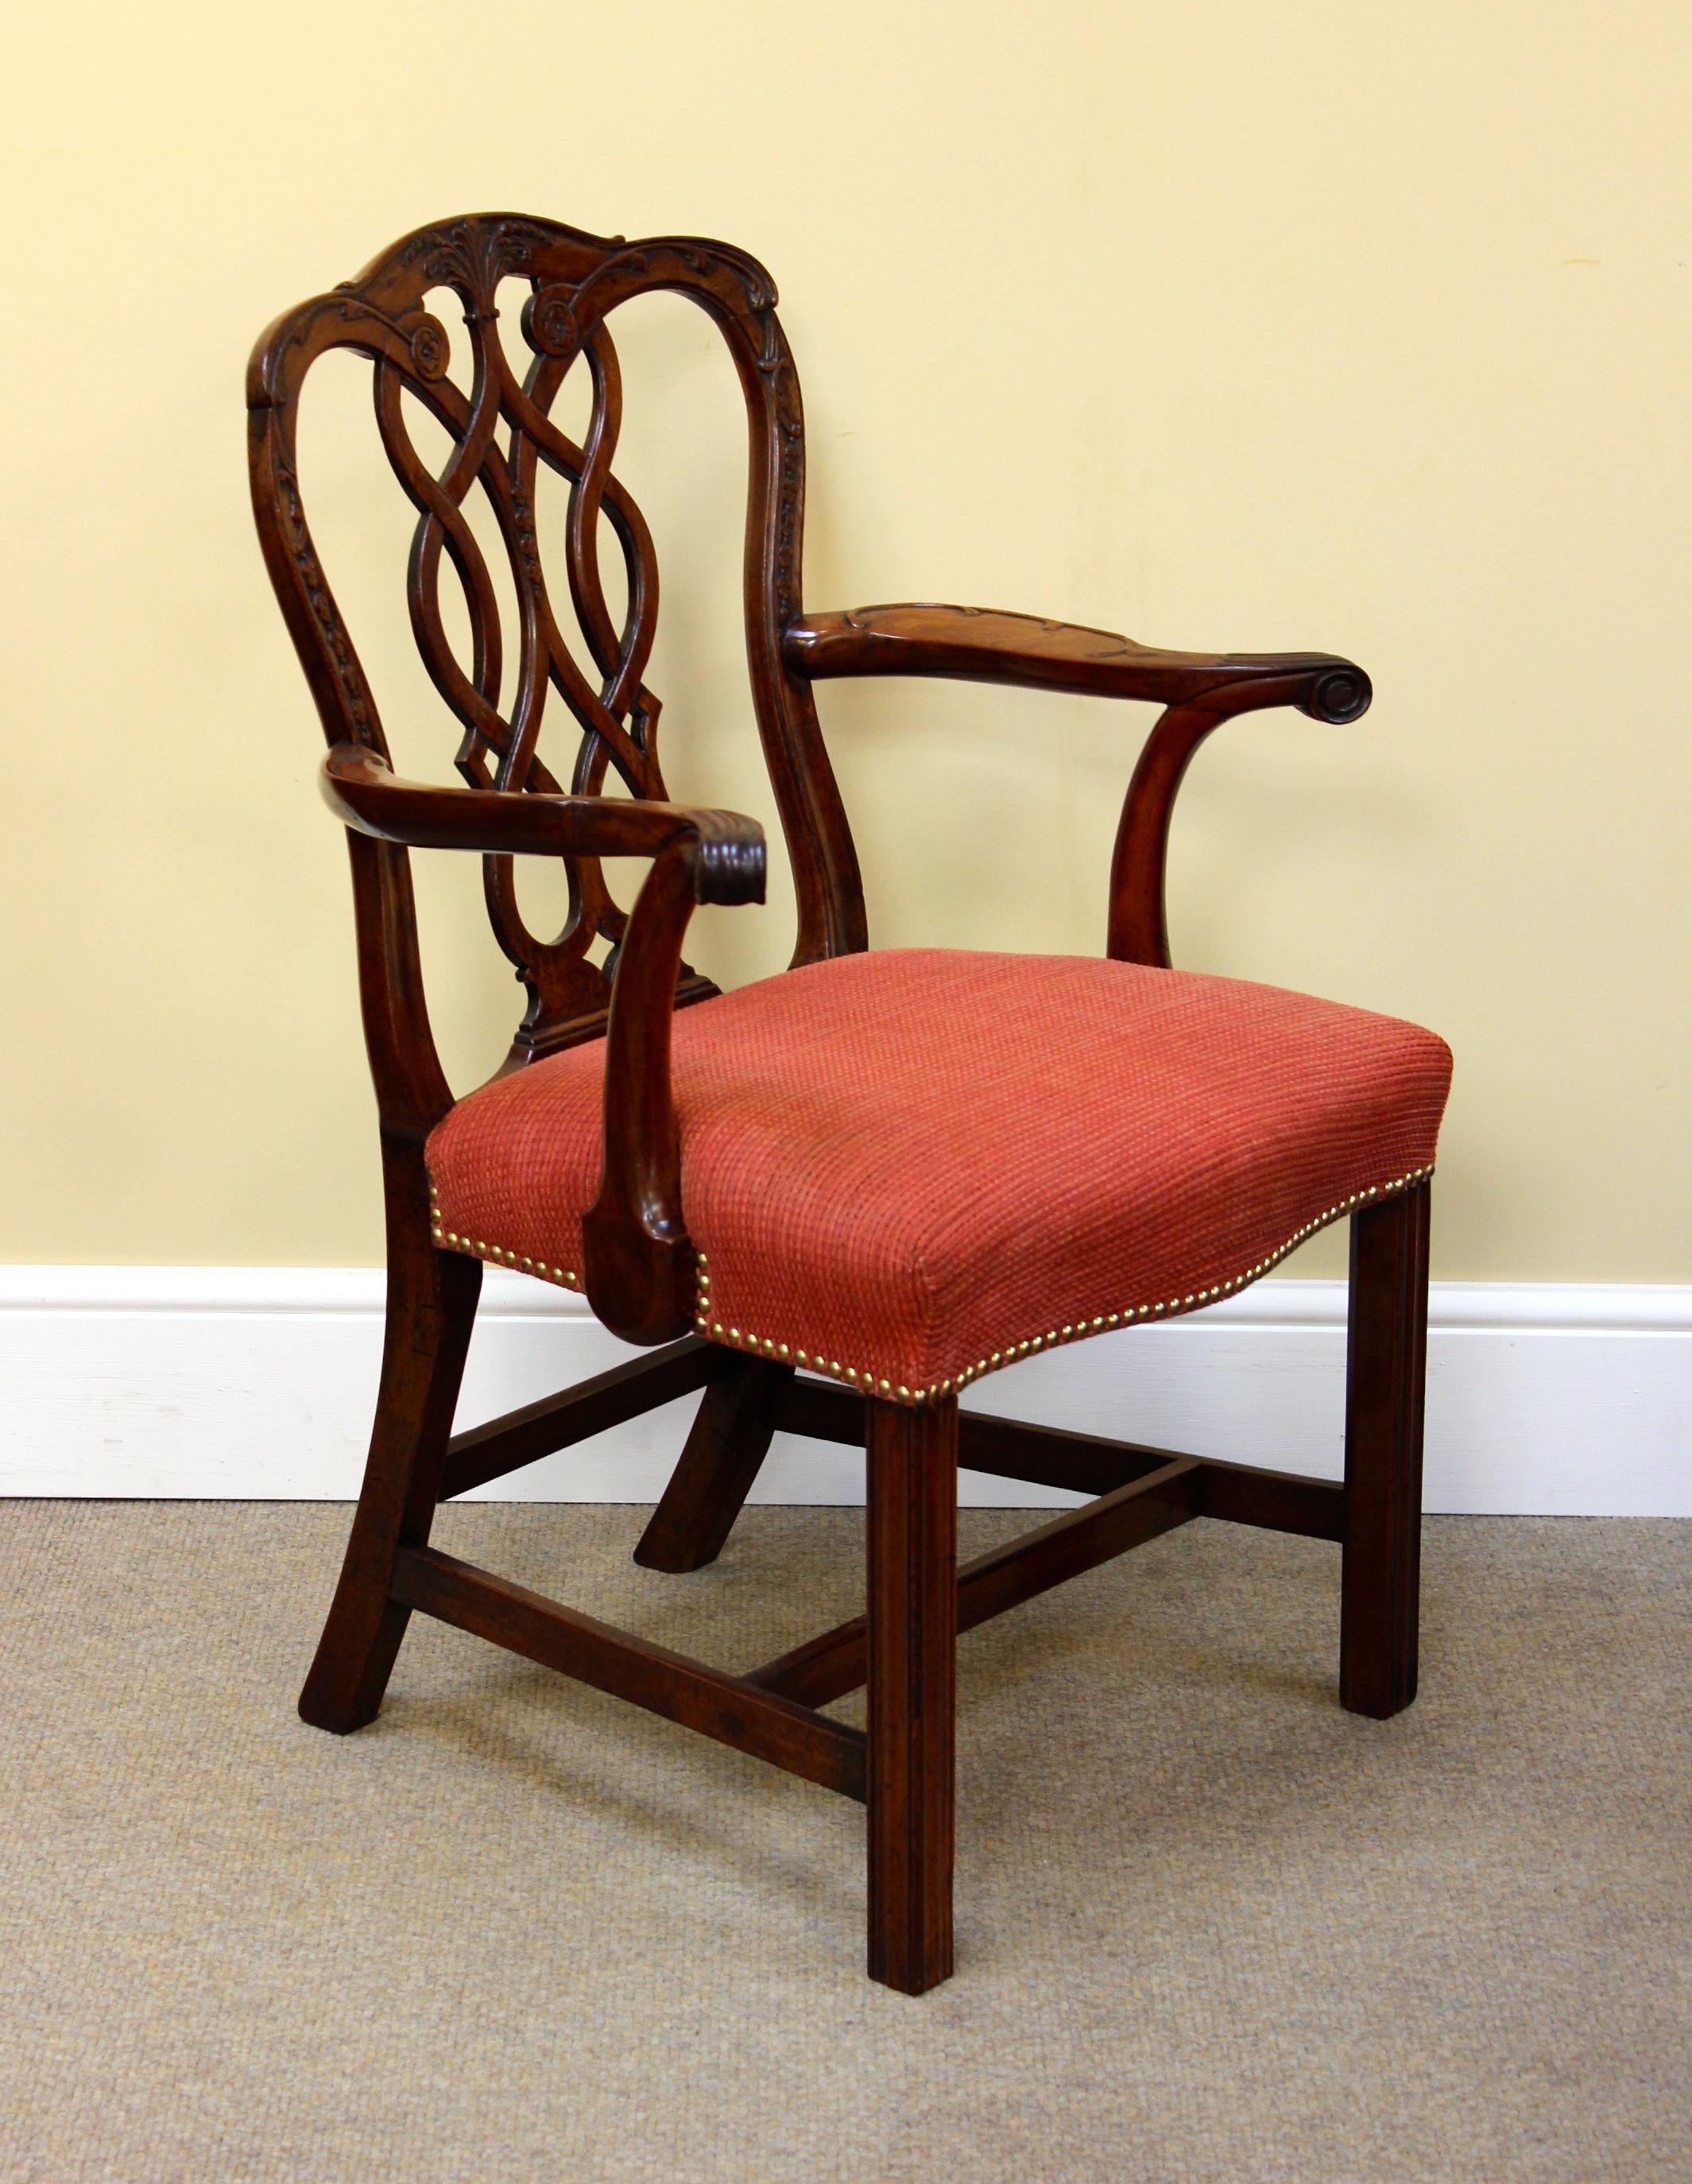 5928
Georgian Mahogany Carver Chair
With fine carving on arms & back,
Carved reeded front legs, upholstered seat
With brass studs.

26”w x 38”h x 19.5”d
66cm w x 96cm h x 50cm d

Items can be delivered by independent carrier but please note NOT all